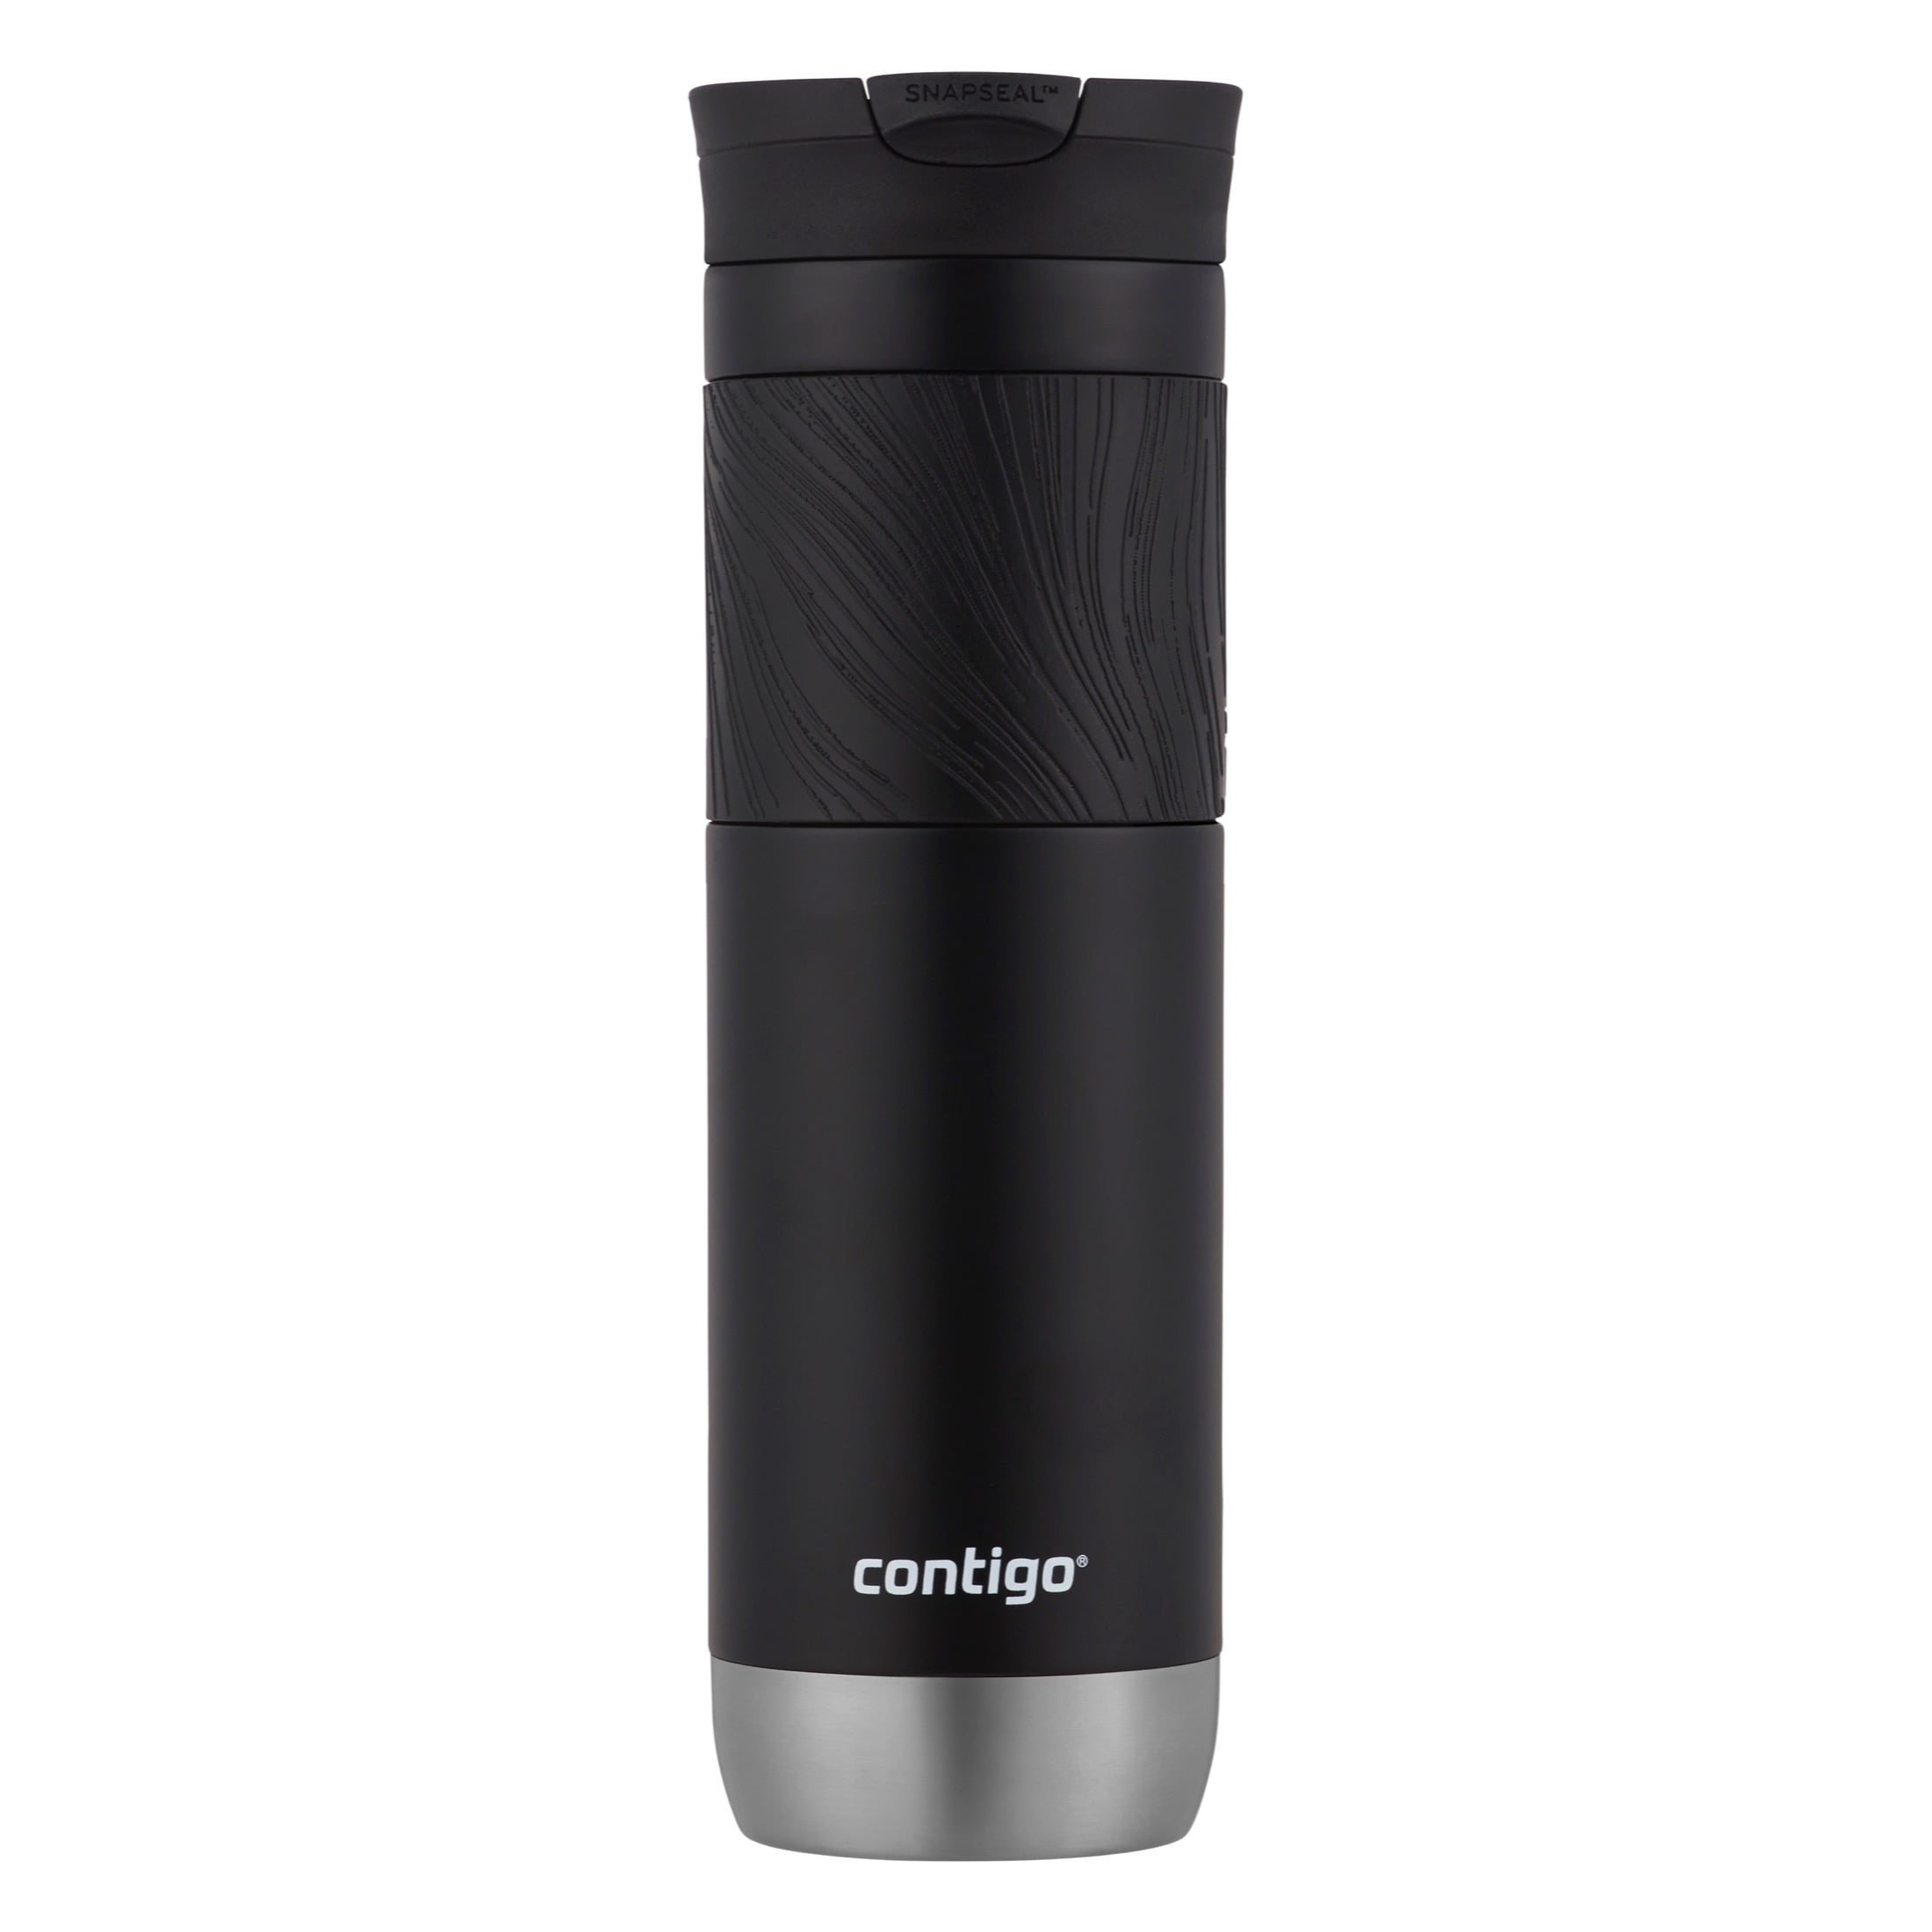 Contigo Byron 2.0 Stainless Steel Travel Mug with SNAPSEAL Lid and Grip in Black, 24 fl oz.